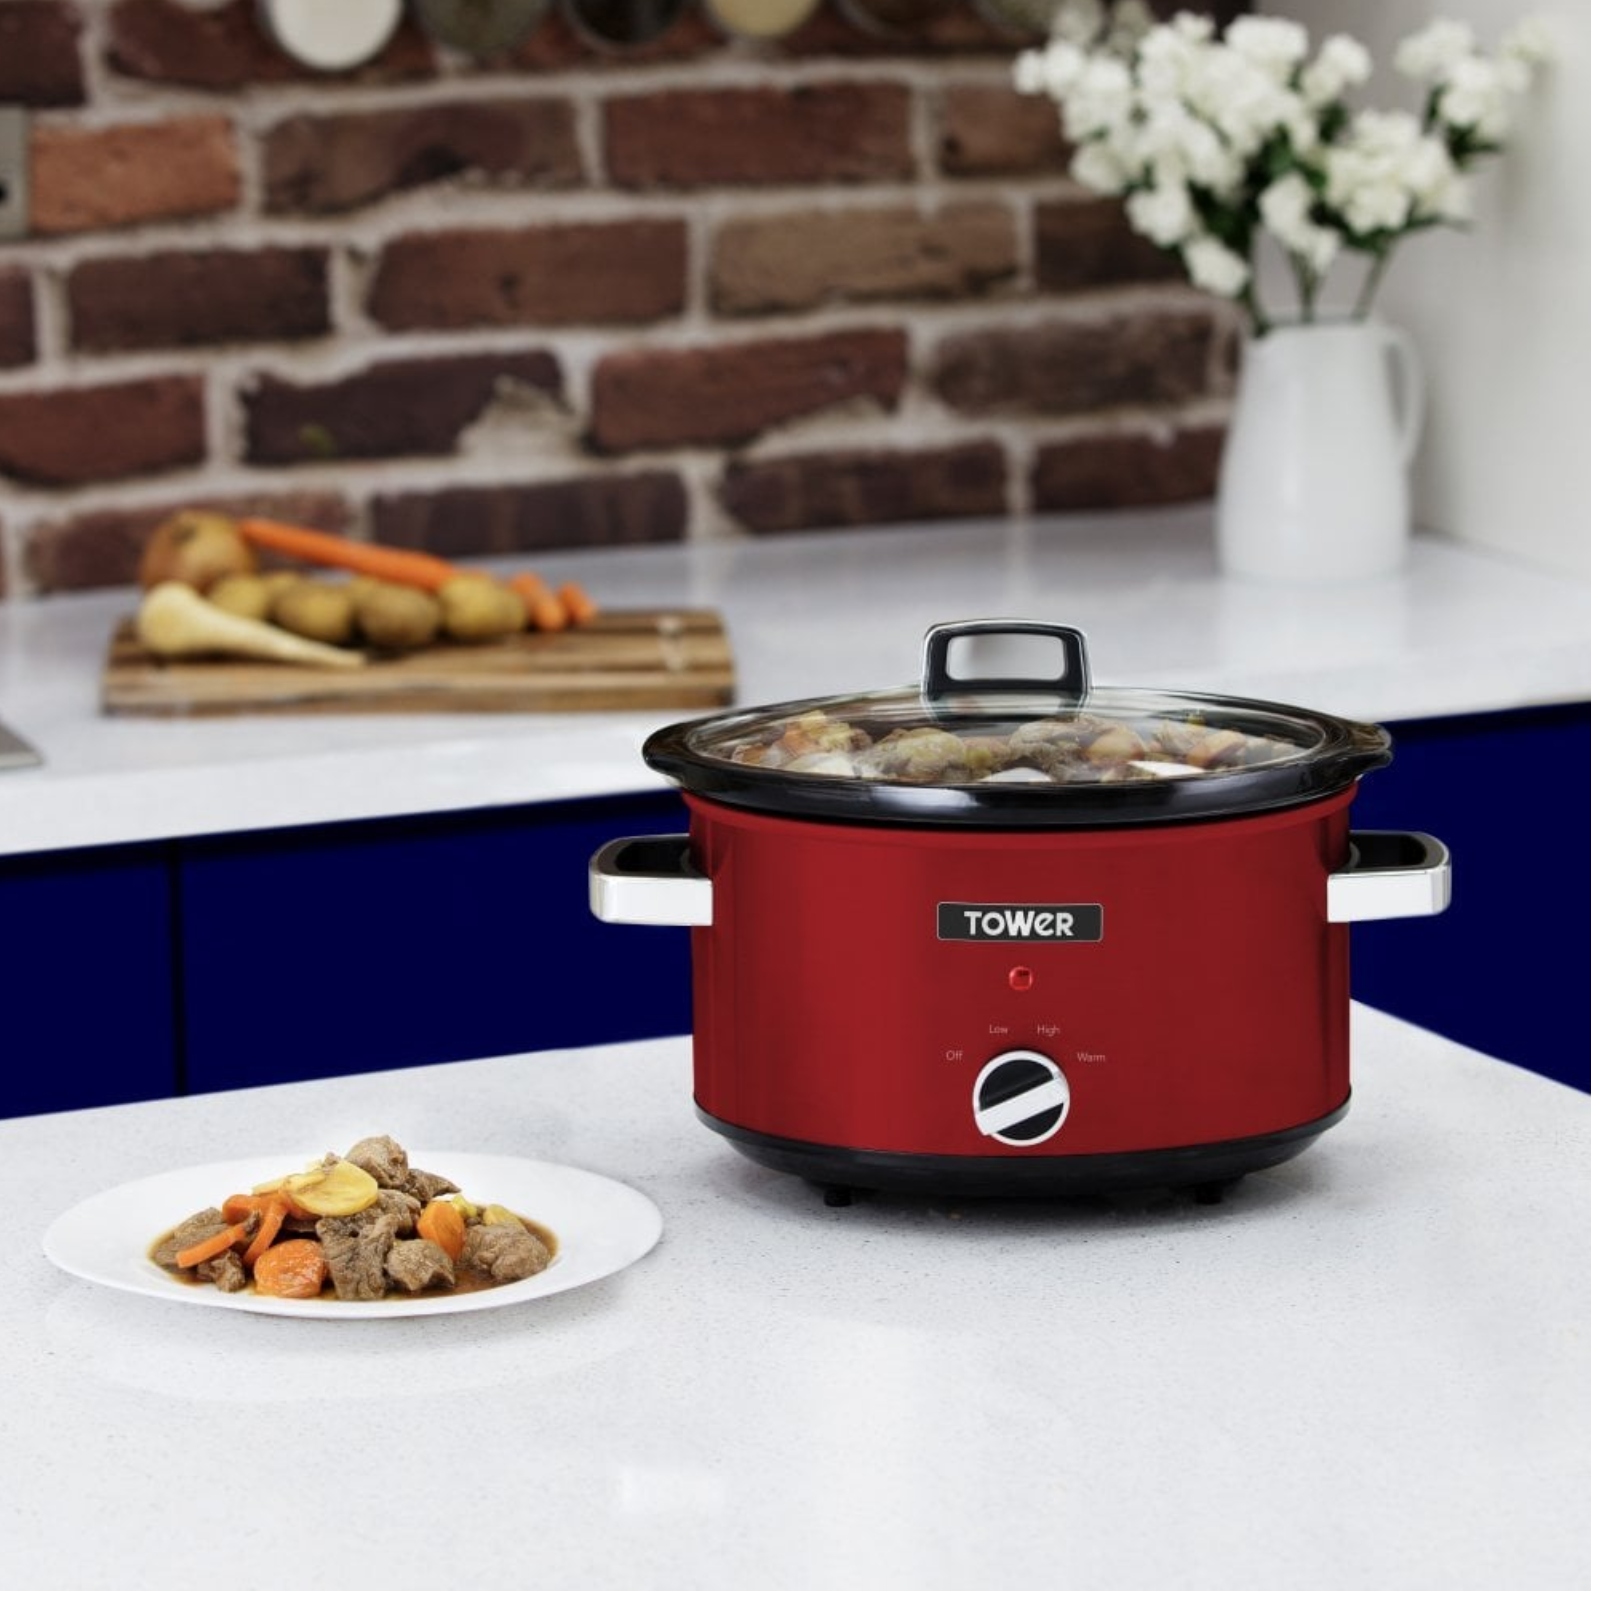 Tower T16018R Slow Cooker 3.5L - Red - Kettle and Toaster Man